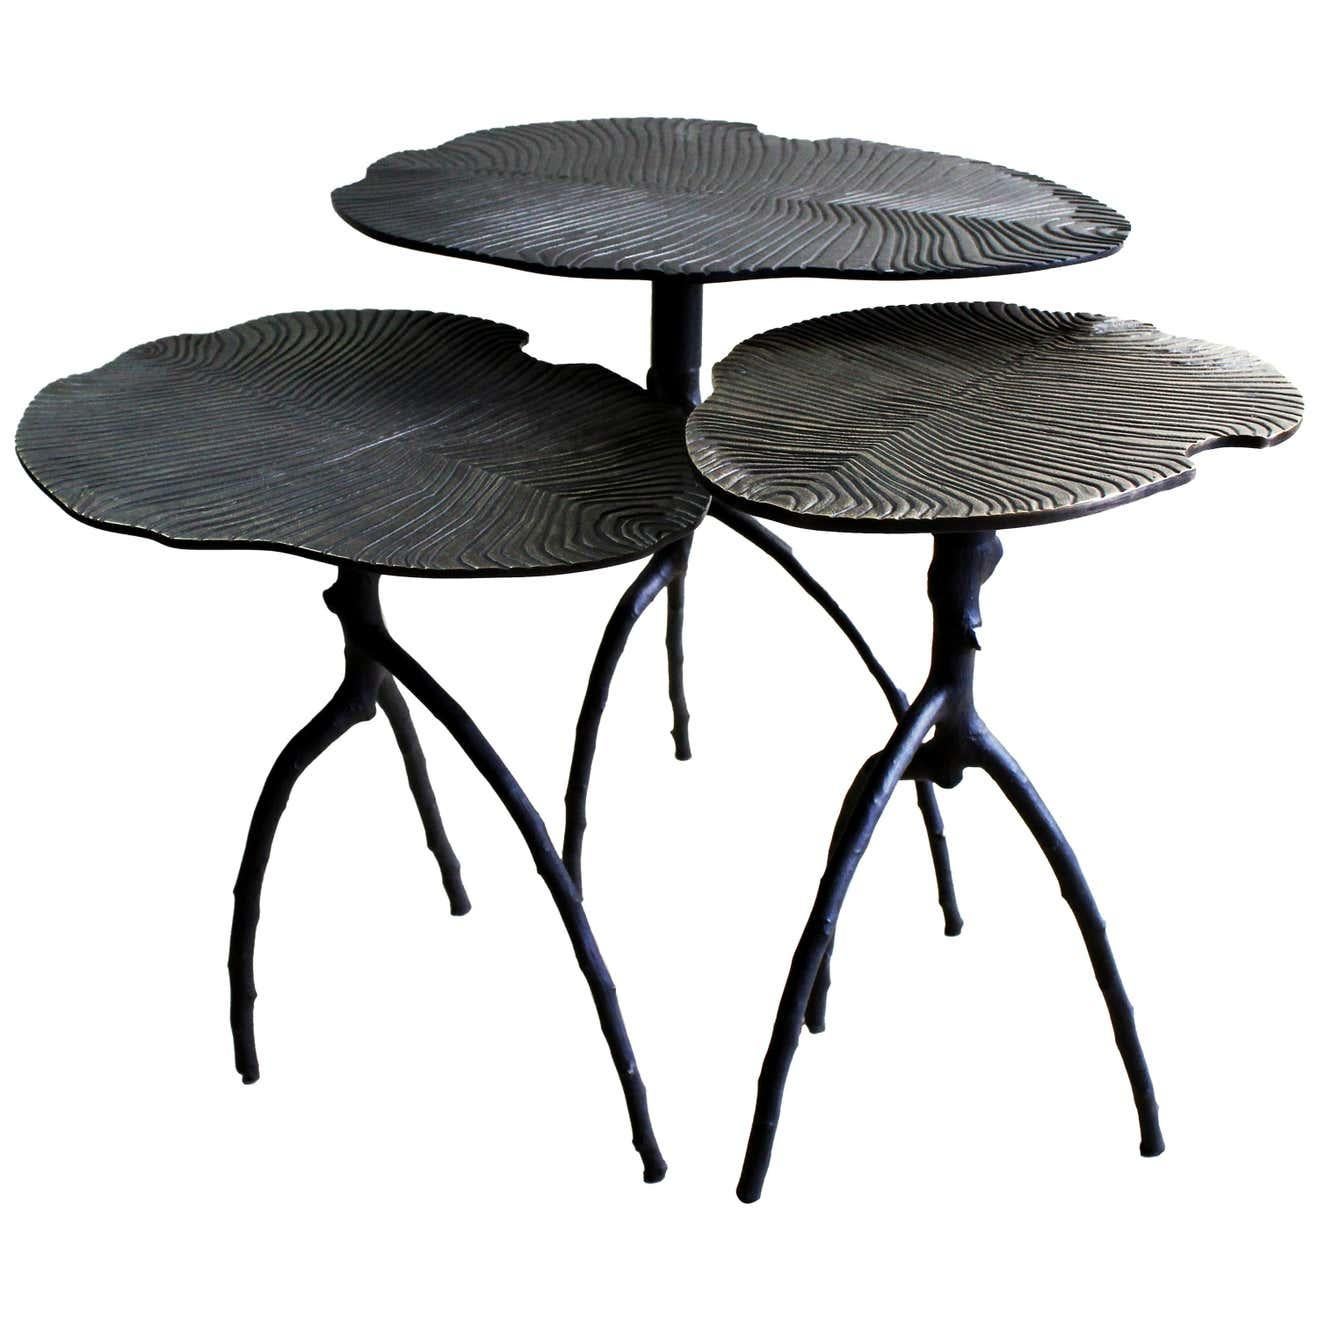 Set of 3 Sauvage Fossil side table by Plumbum 
Signed by Eric Gizard and Plumbum
Dimensions: 
Small: 13.58